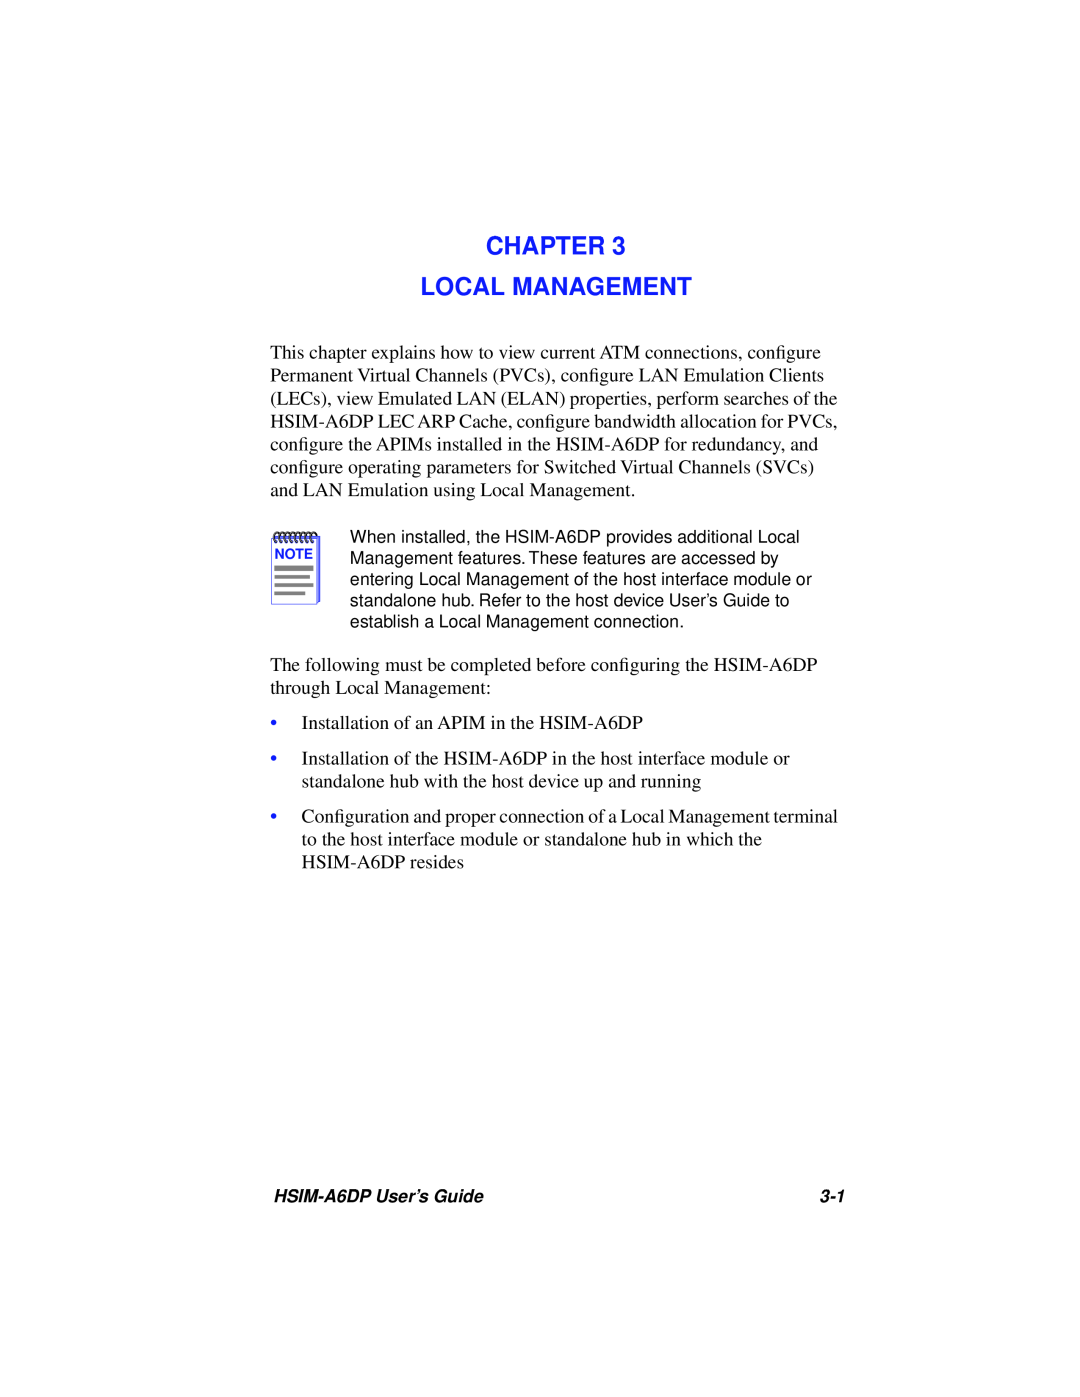 Cabletron Systems HSIM-A6DP manual Chapter Local Management 